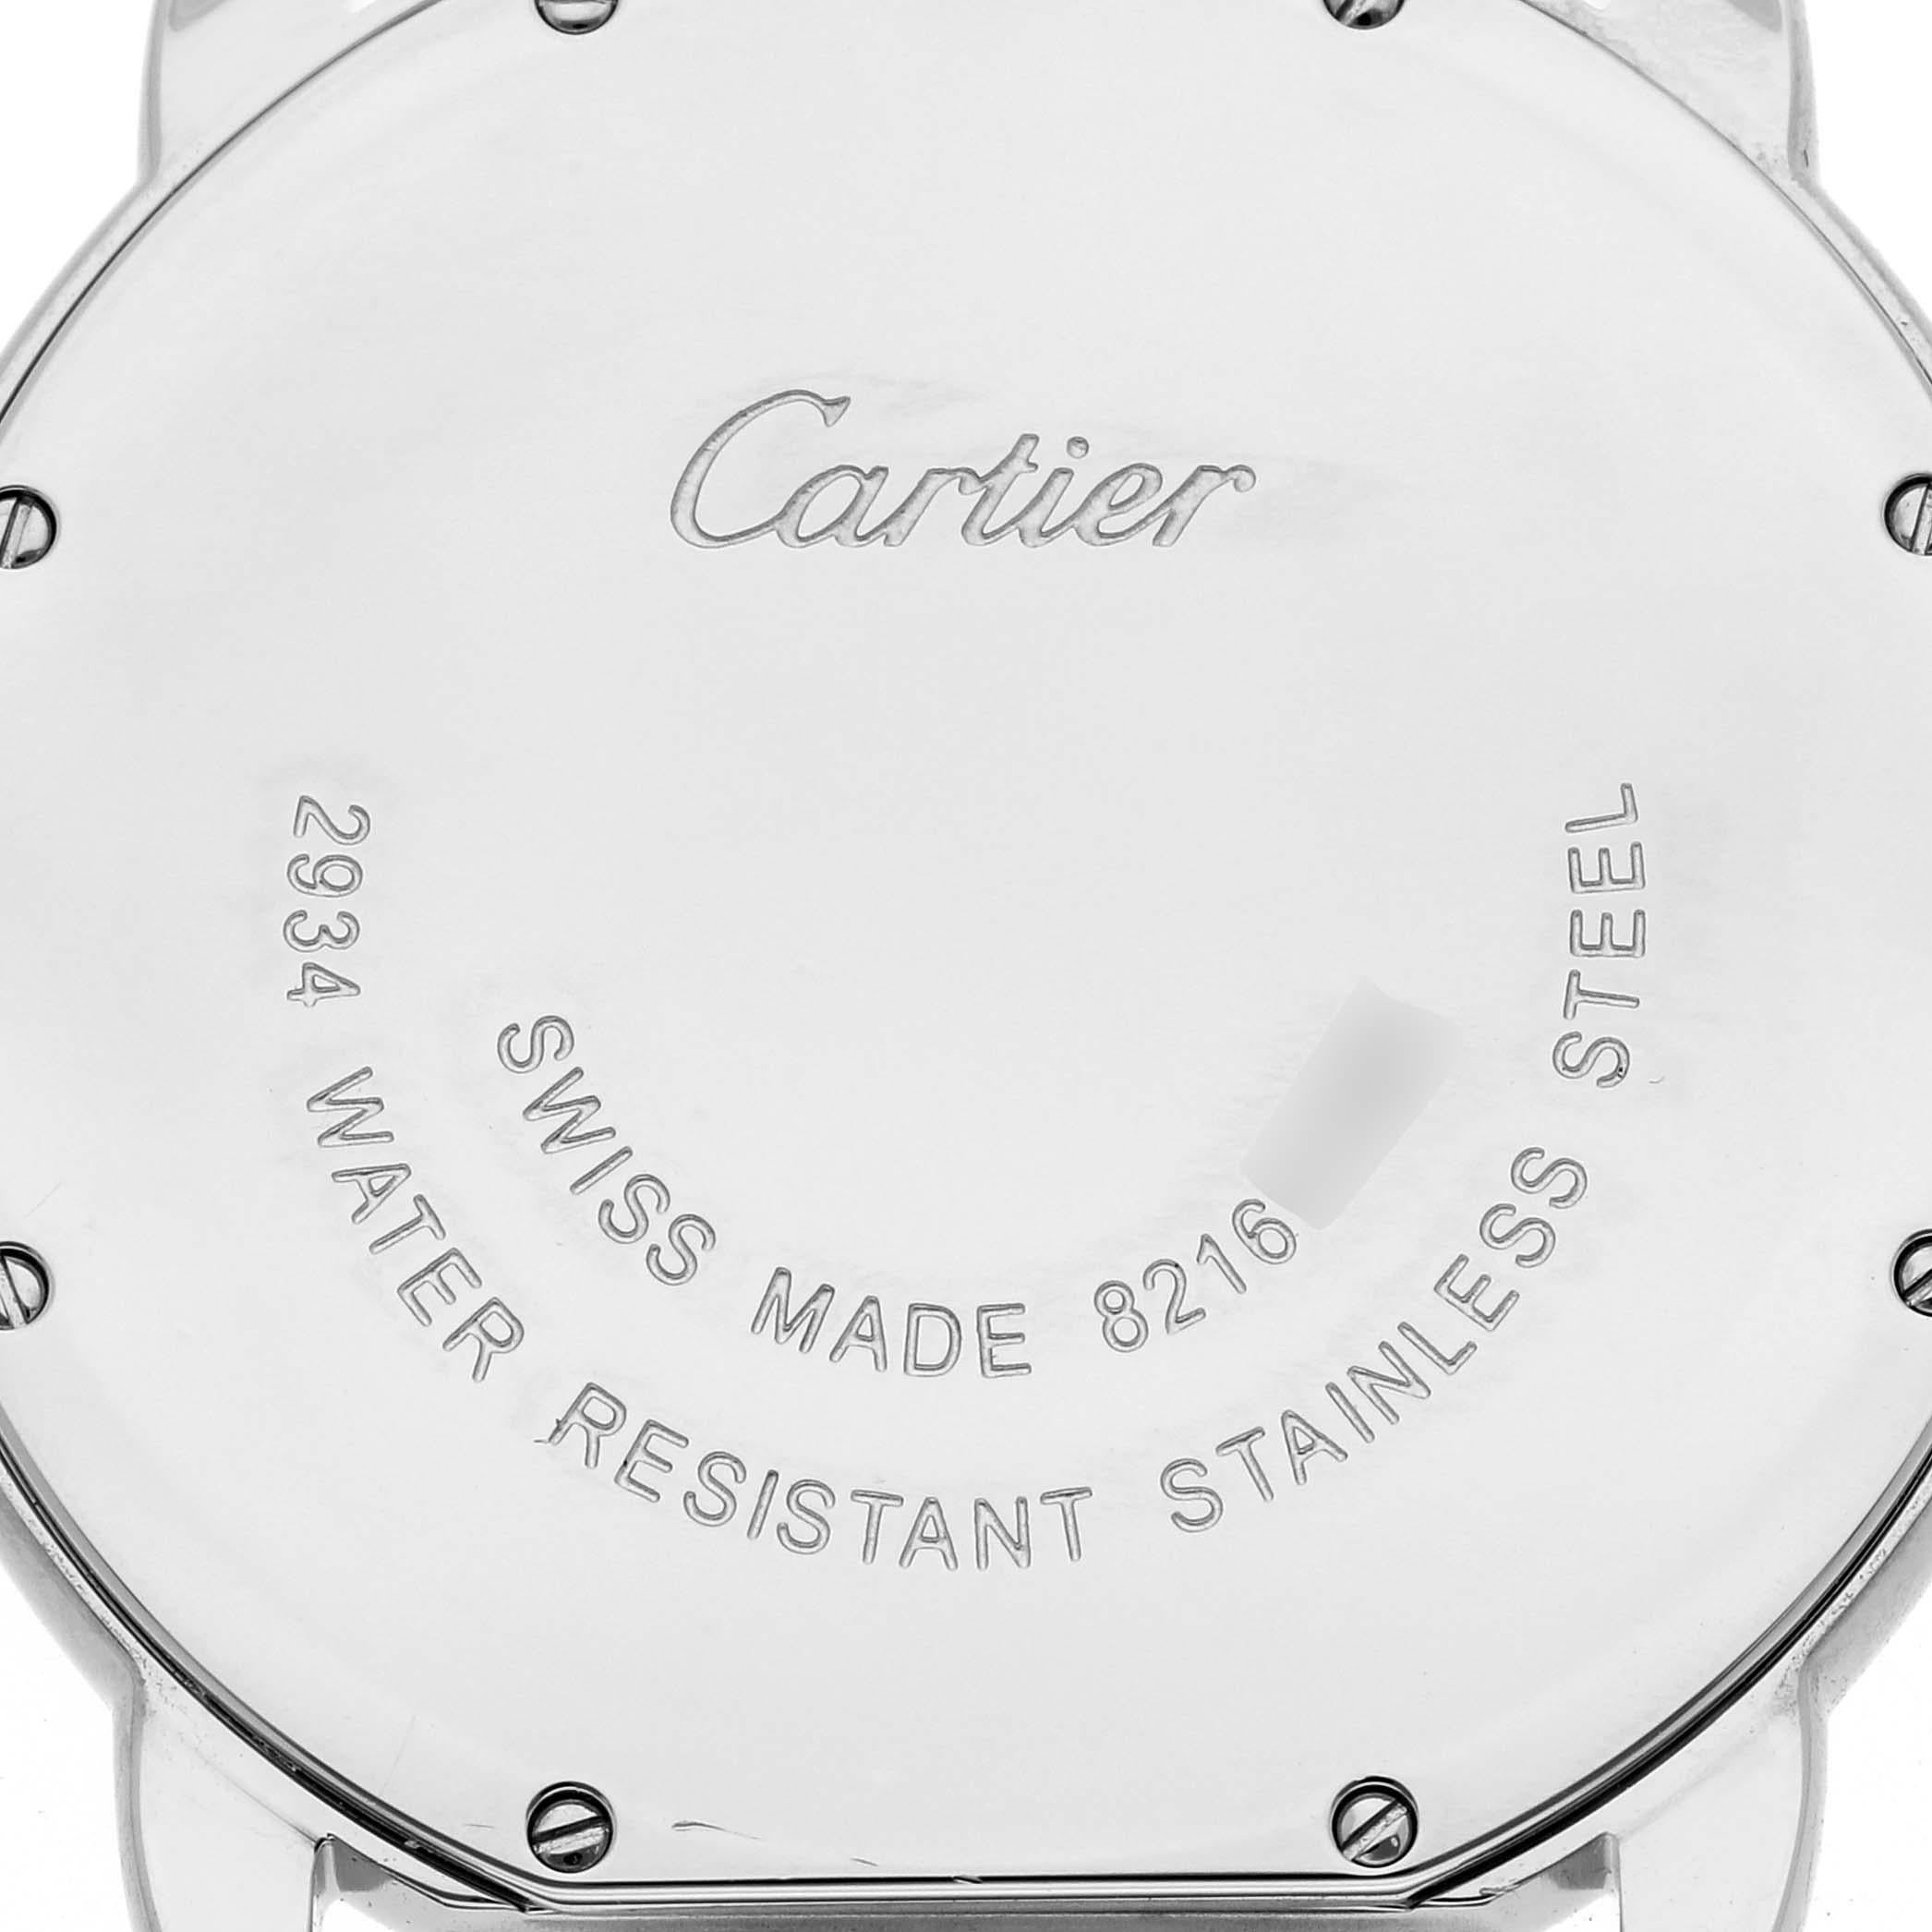 Cartier Ronde Solo Silver Dial Quartz Steel Ladies Watch WSRN0029. Quartz movement. Stainless steel case 36.0 mm in diameter. Circular grained crown set with a blue spinel cabochon. . Scratch resistant sapphire crystal. Silvered opaline dial with